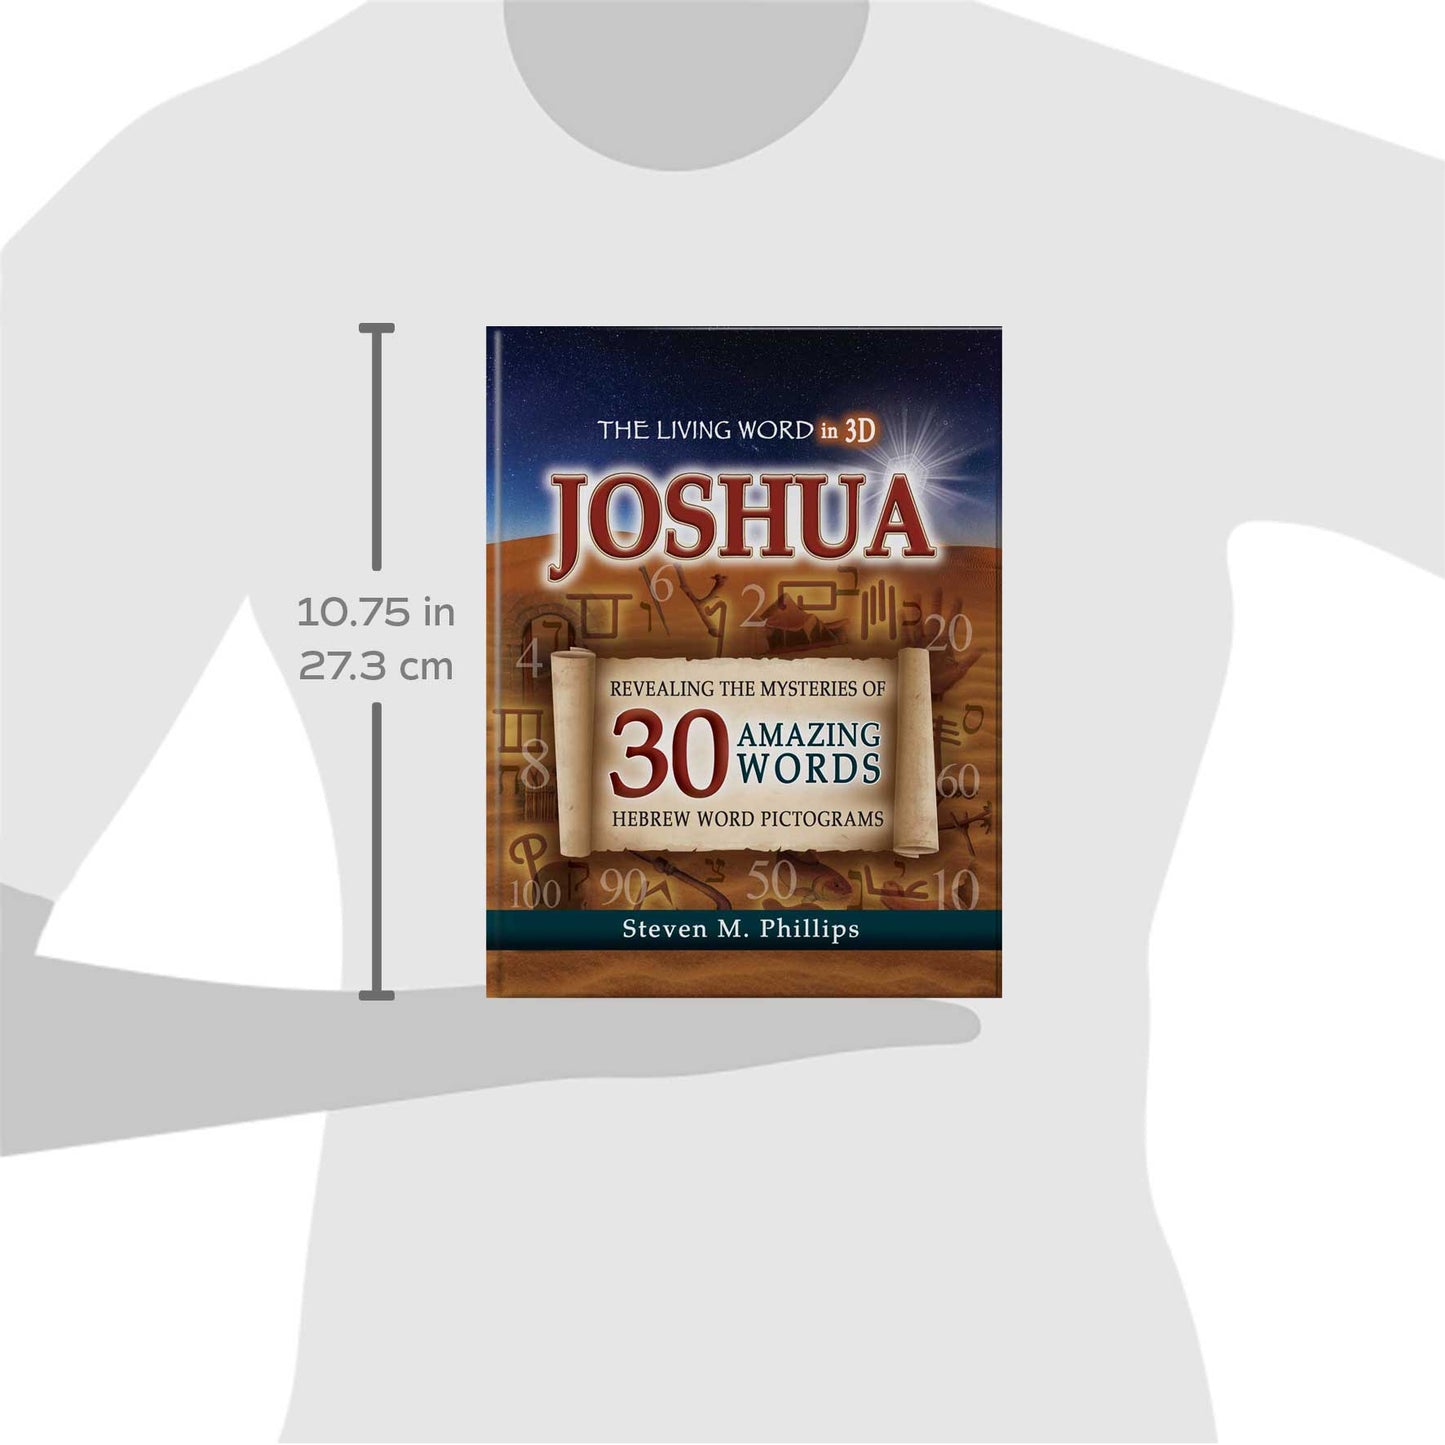 Joshua: Revealing the Mysteries of 30 Amazing Words